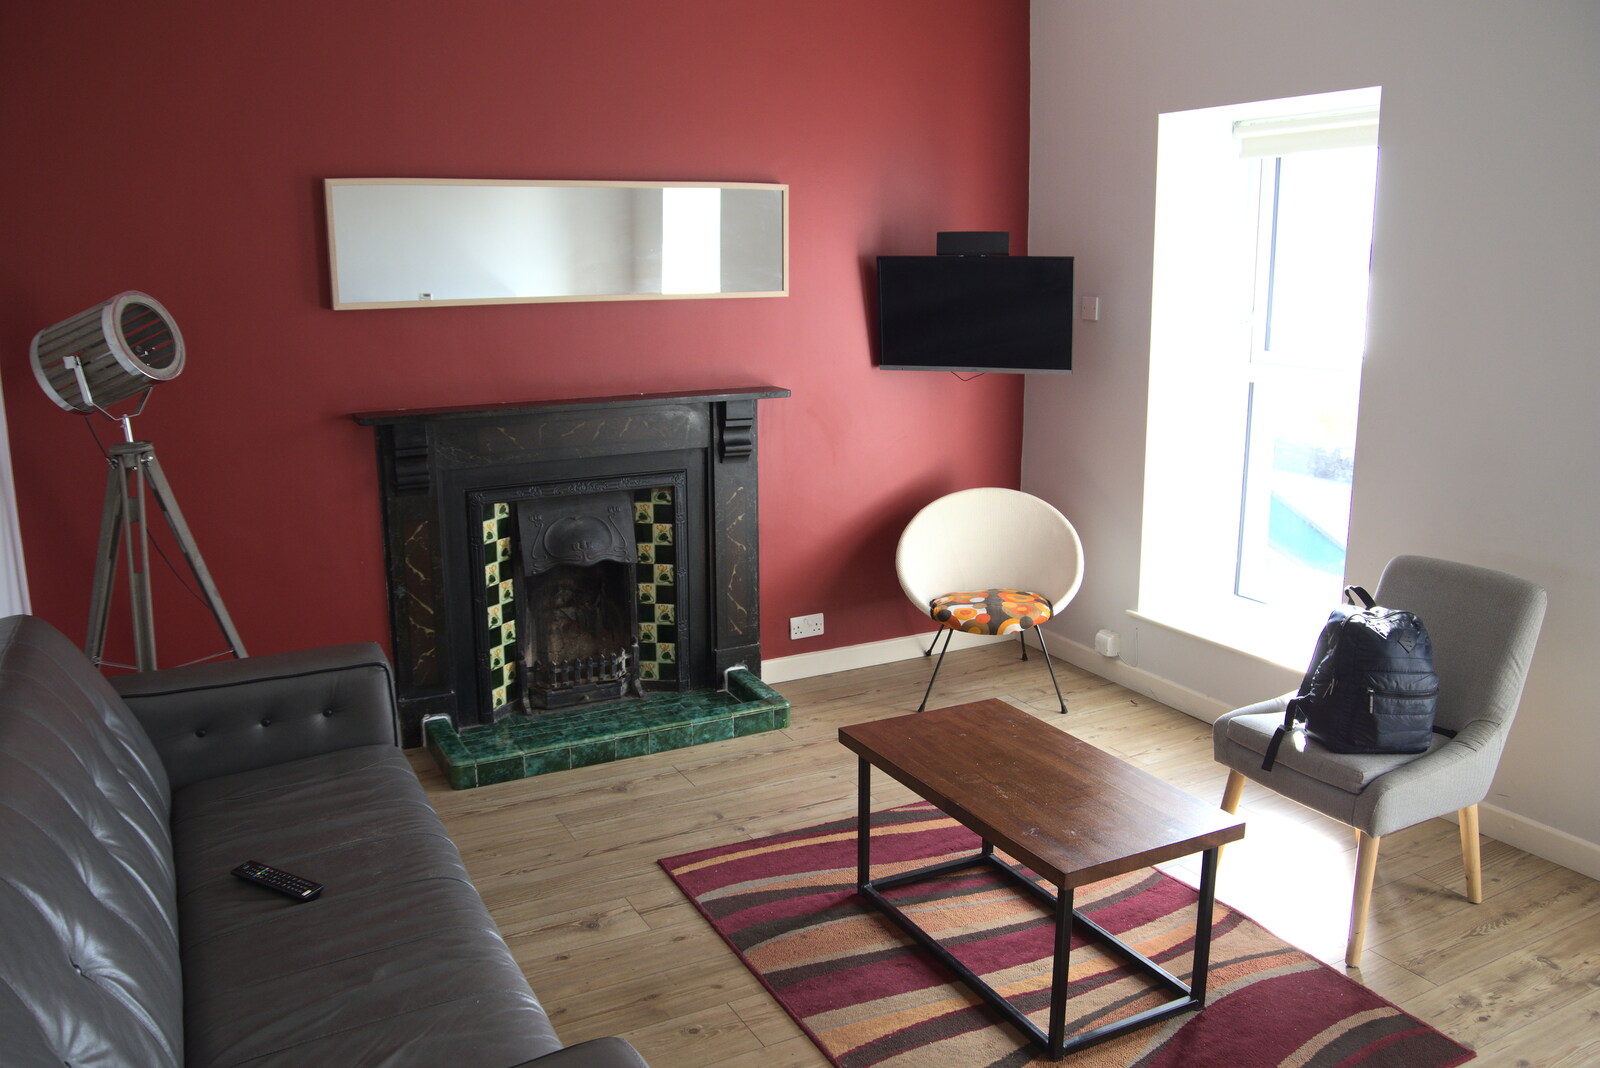 Greencastle, Doagh and Malin Head, County Donegal, Ireland - 19th April 2022: The apartment's lounge has an original fireplace